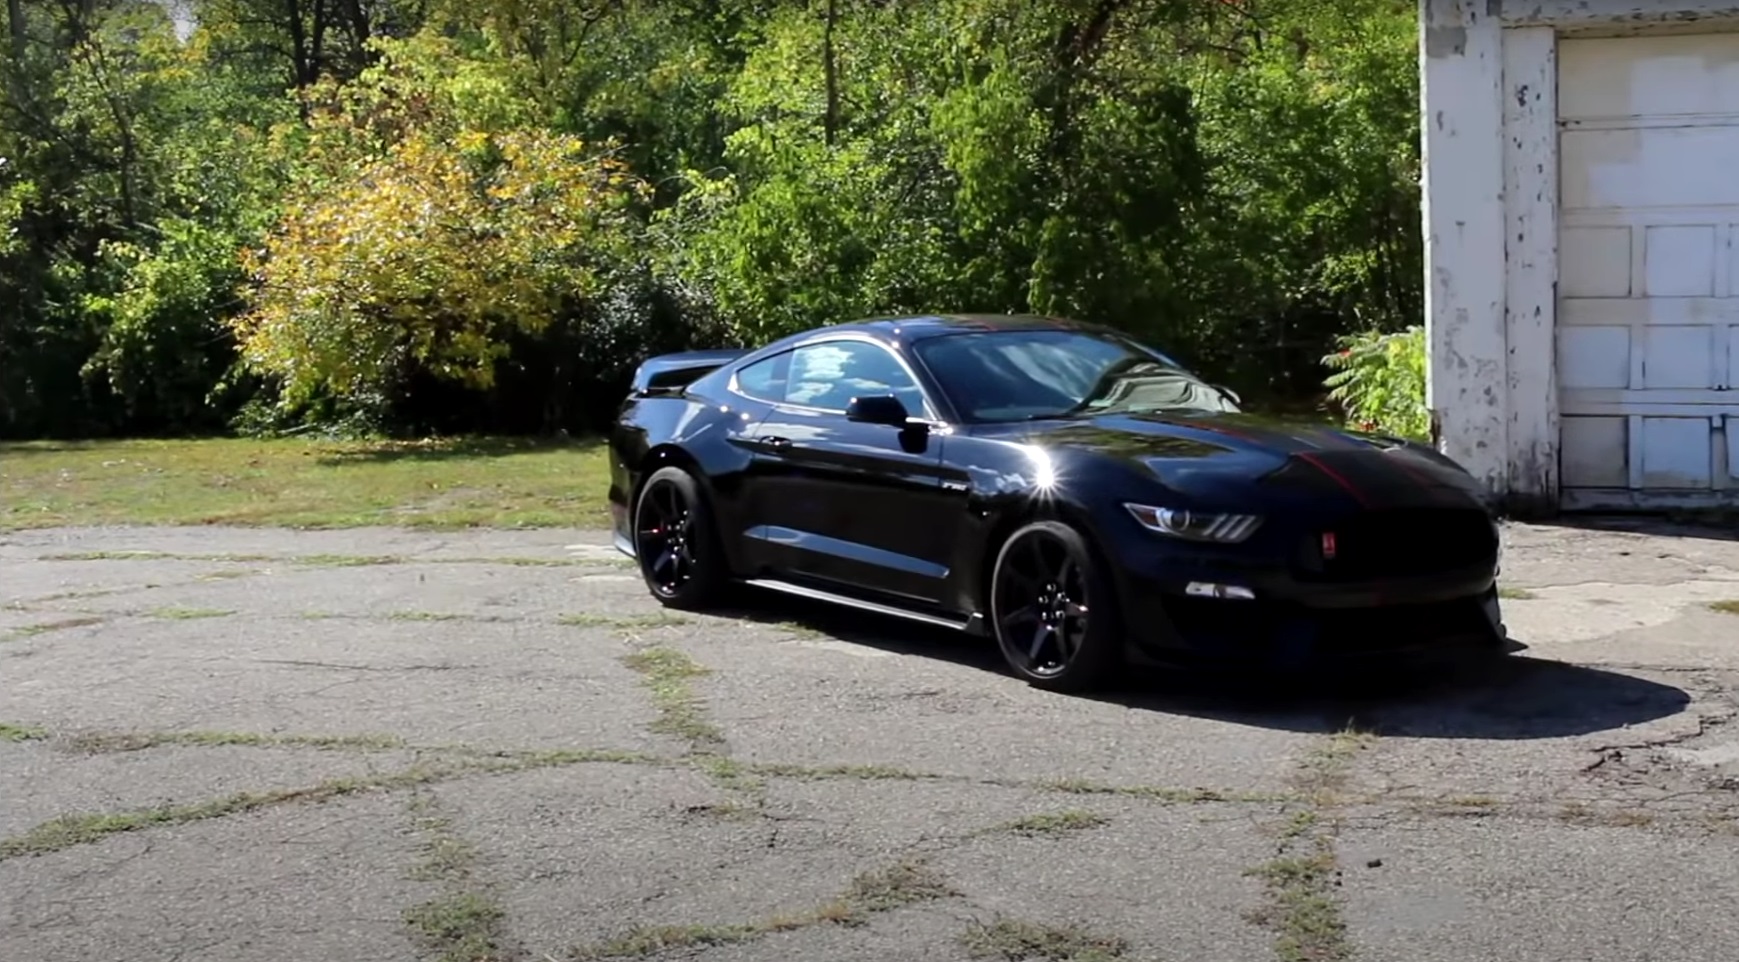 Video: 2018 Ford Mustang Shelby GT350R - A $80,000 Mustang?